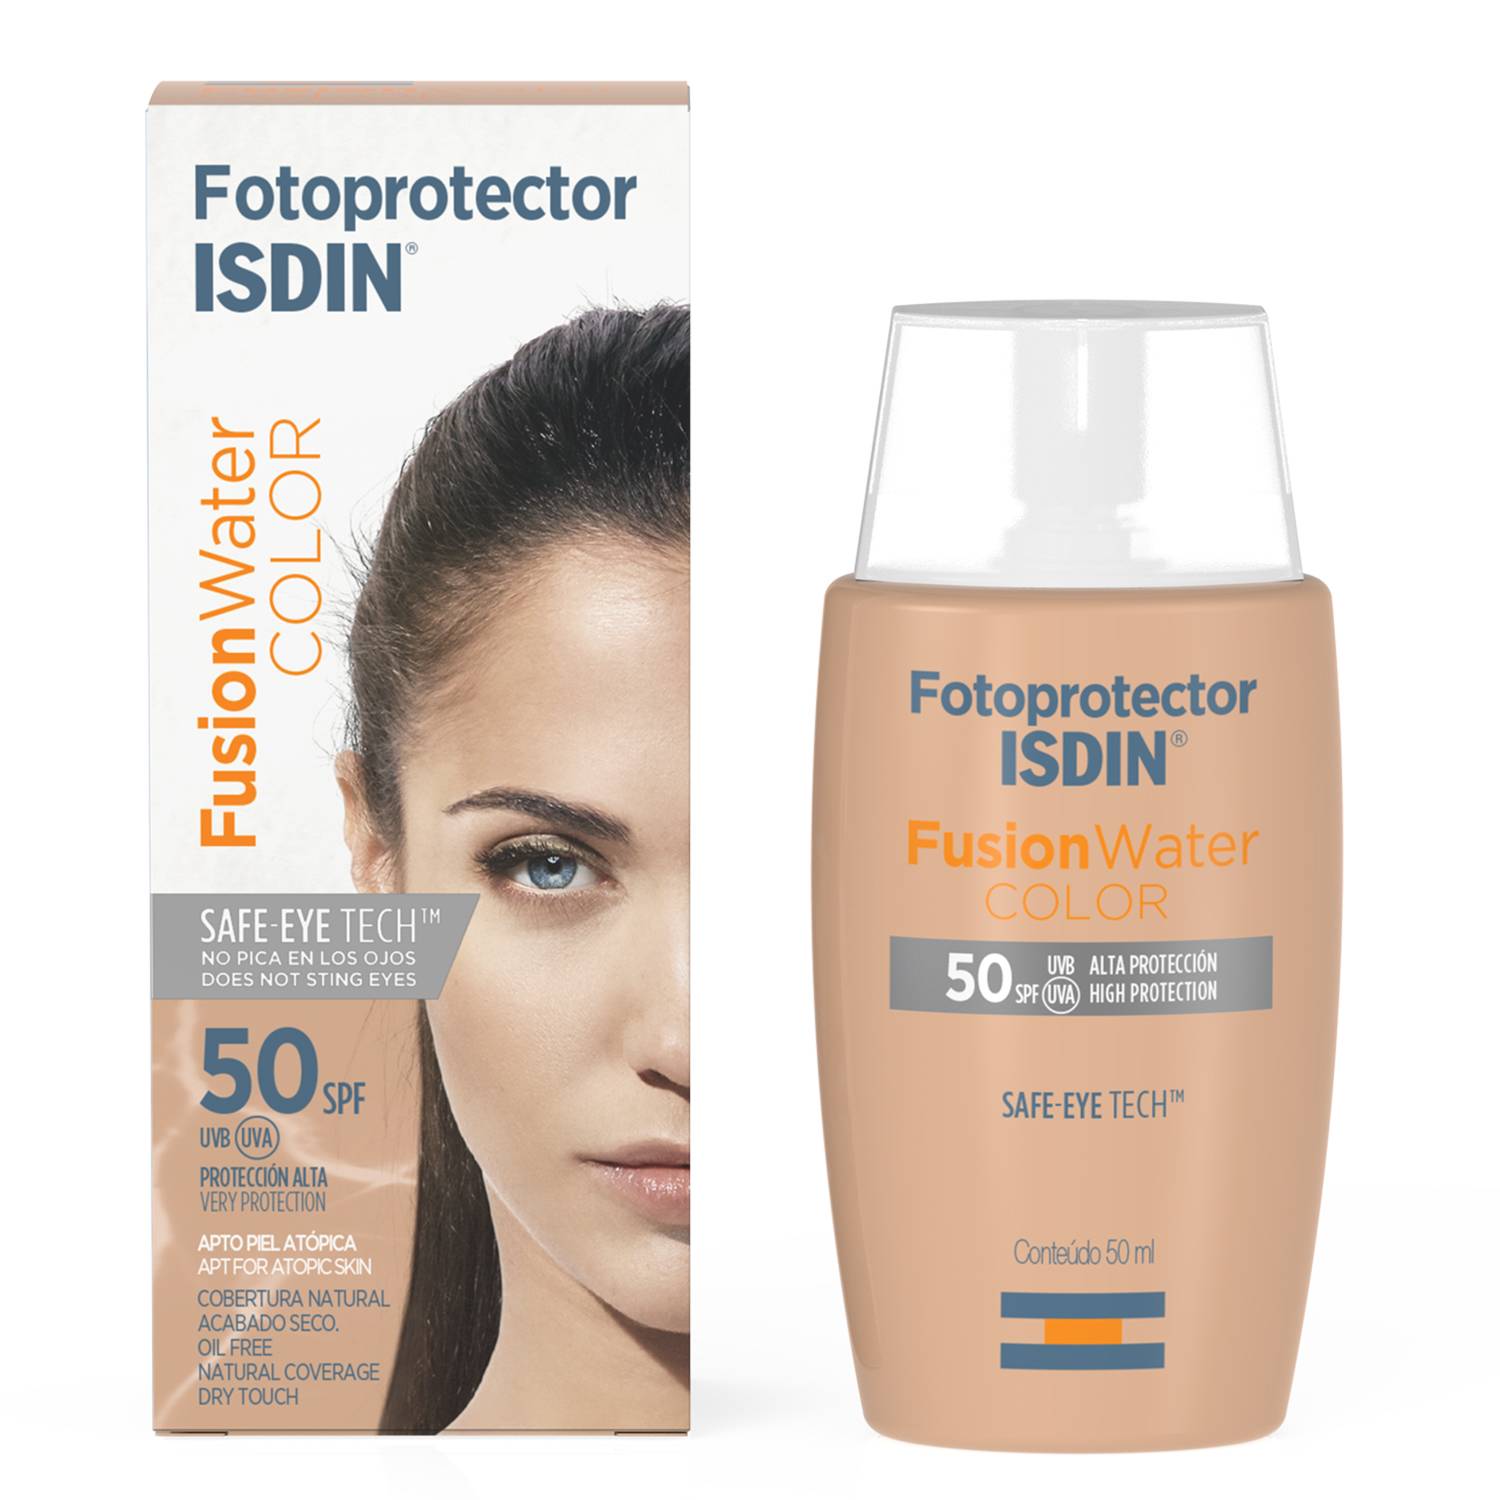 Fotoprotector ISDIN Fusion Water Color SPF 50+